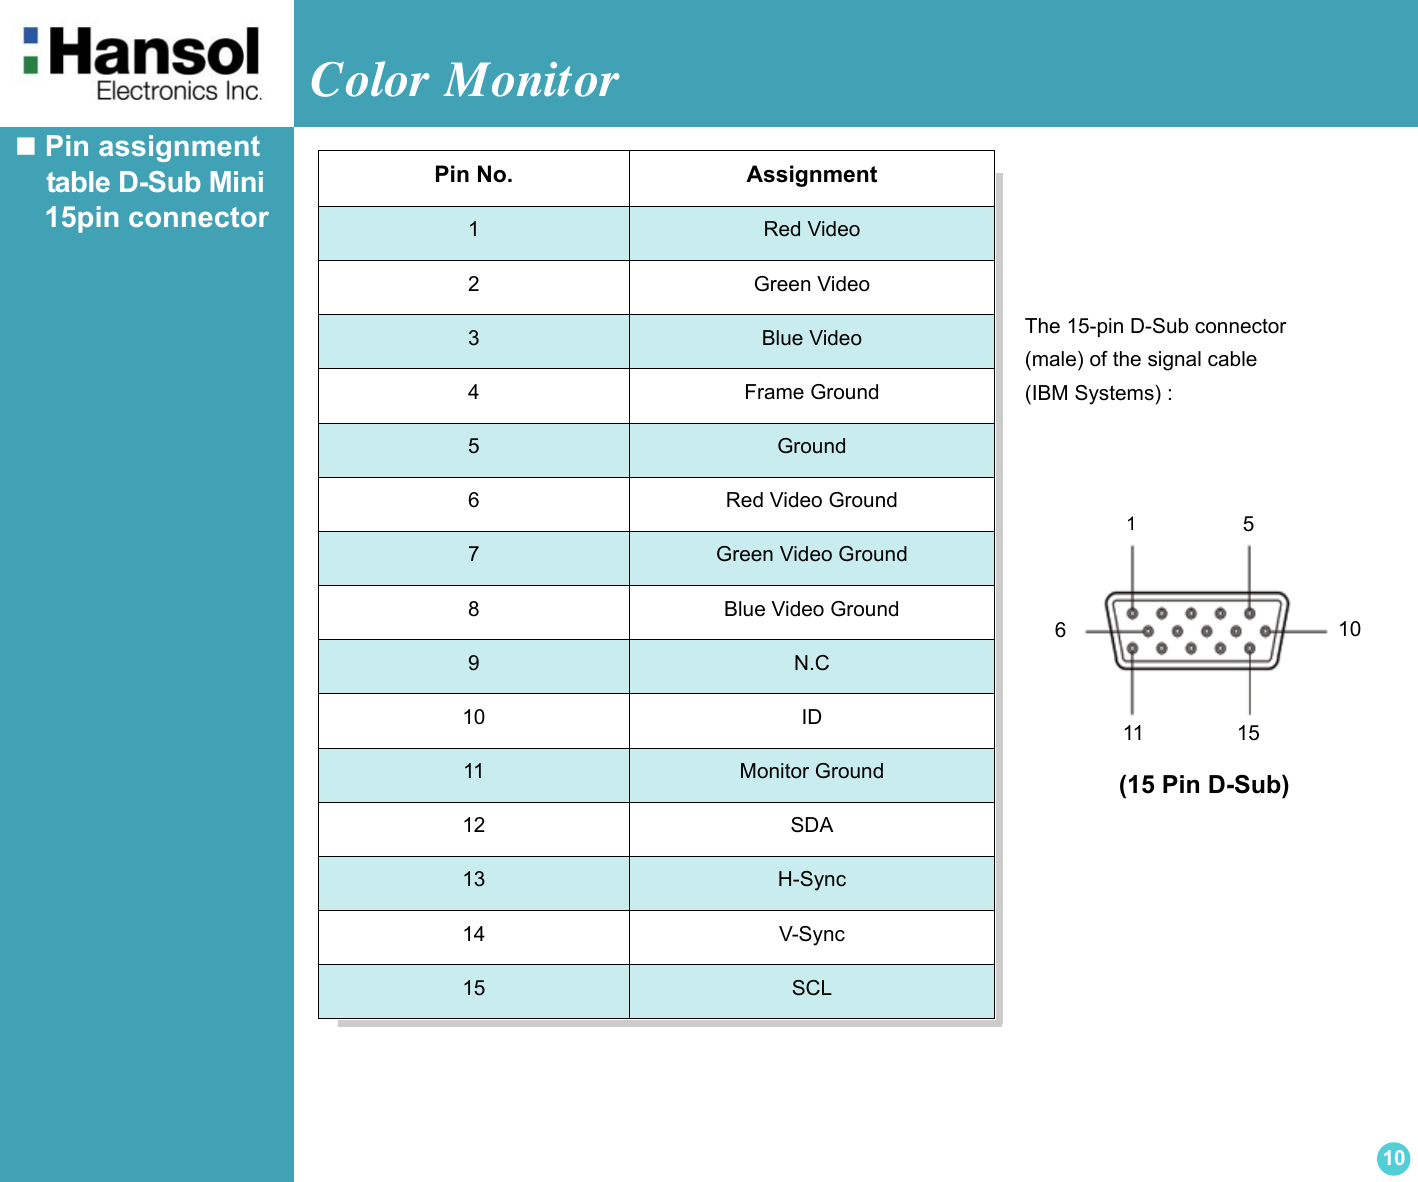 Color Monitor 10 Pin assignment   table D-Sub Mini   15pin connectorzThe 15-pin D-Sub connector(male) of the signal cable(IBM Systems) :1                   5610 11                15(15 Pin D-Sub)Pin No. Assignment1Red Video2 Green Video3Blue Video4 Frame Ground5Ground6 Red Video Ground7Green Video Ground8 Blue Video Ground9 N.C10 ID11 Monitor Ground12 SDA13 H-Sync14 V-Sync15 SCL